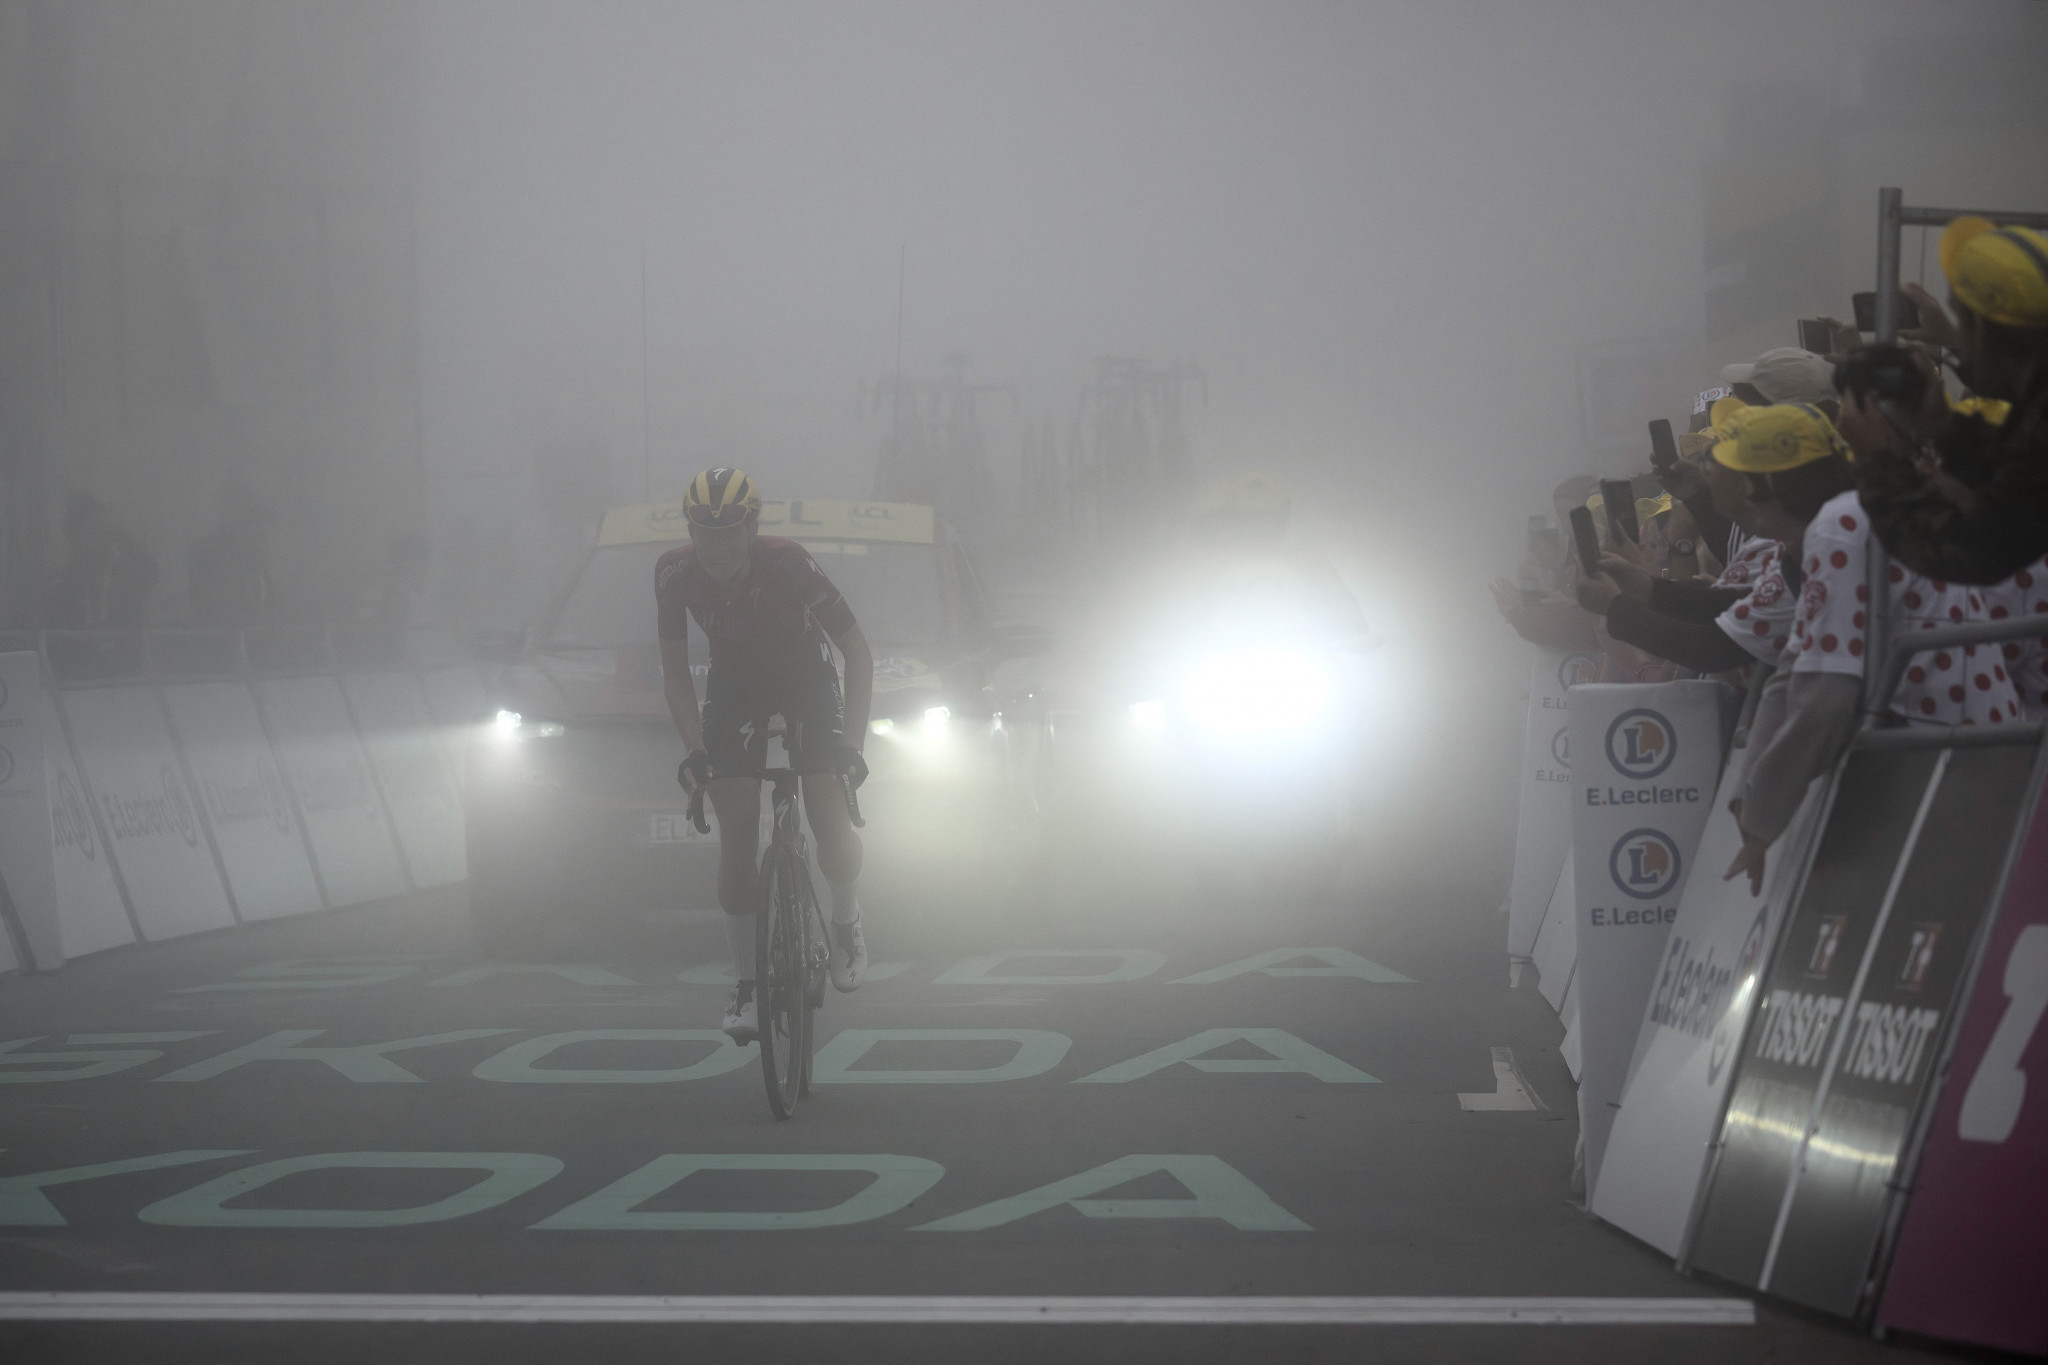 The Netherlands' Demi Vollering claimed a decisive victory in the fog on stage seven, having earlier been handed a 20 second penalty for a drafting incident on stage five ©Getty Images